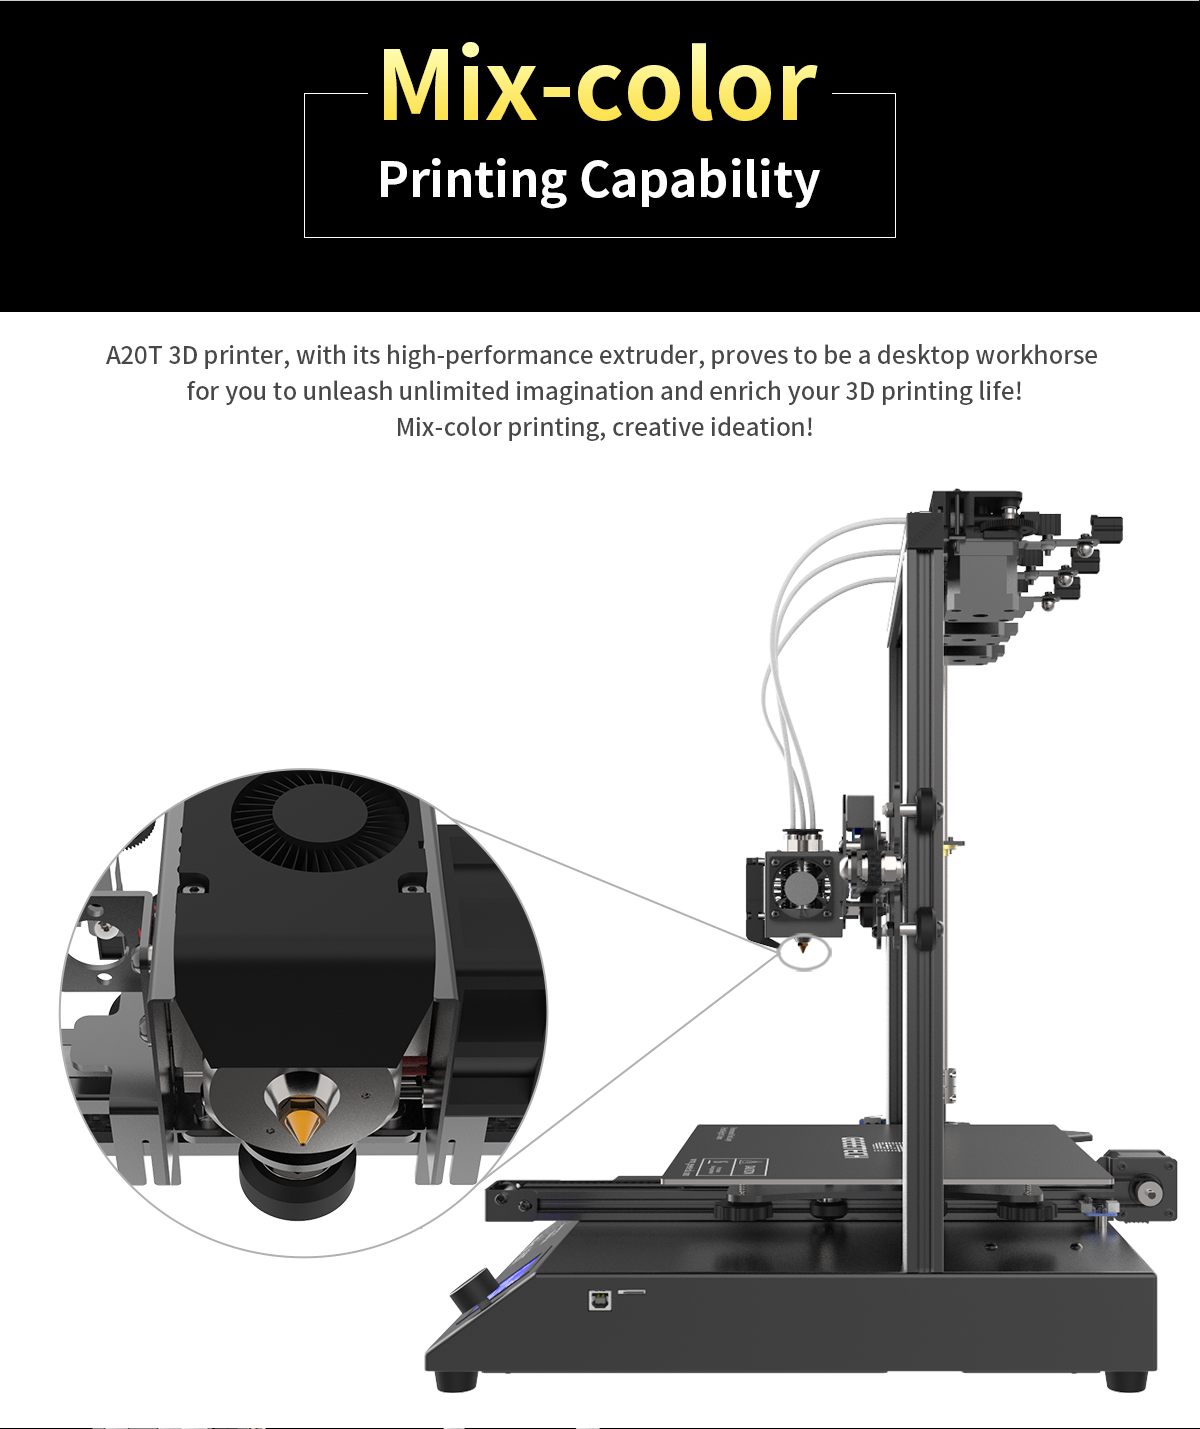 geeetech a20t description of printing capability